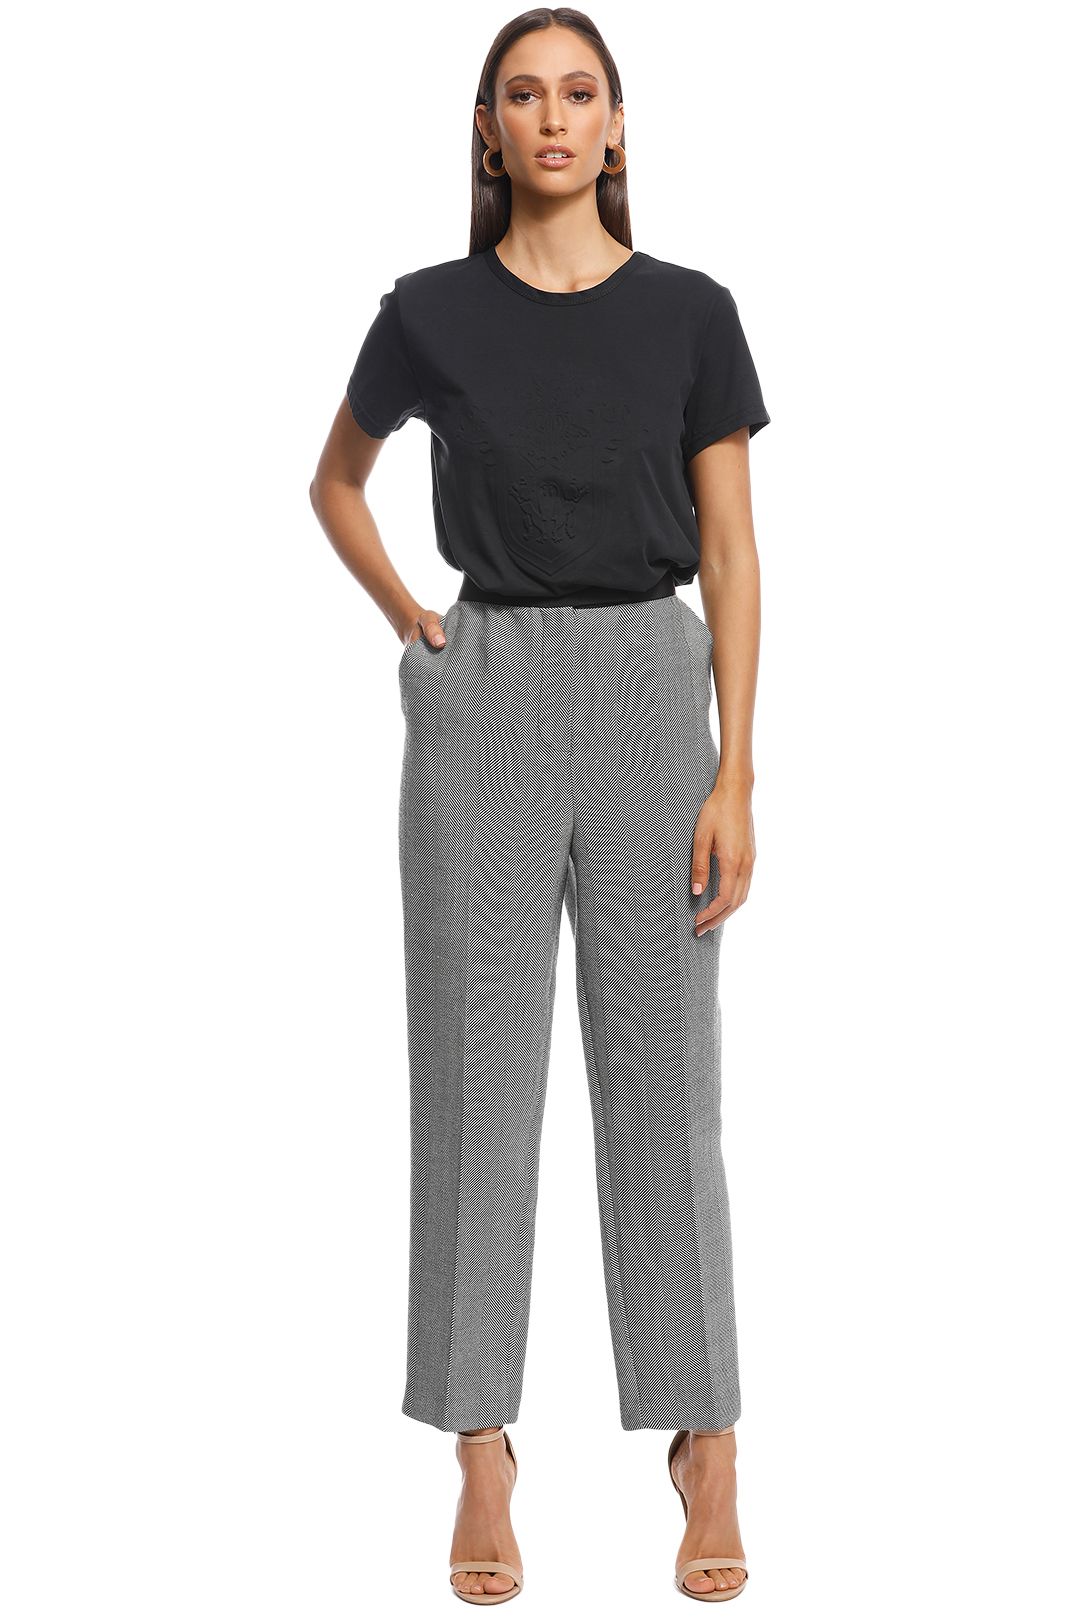 Camilla and Marc - Hayworth Trouser - Grey - Front